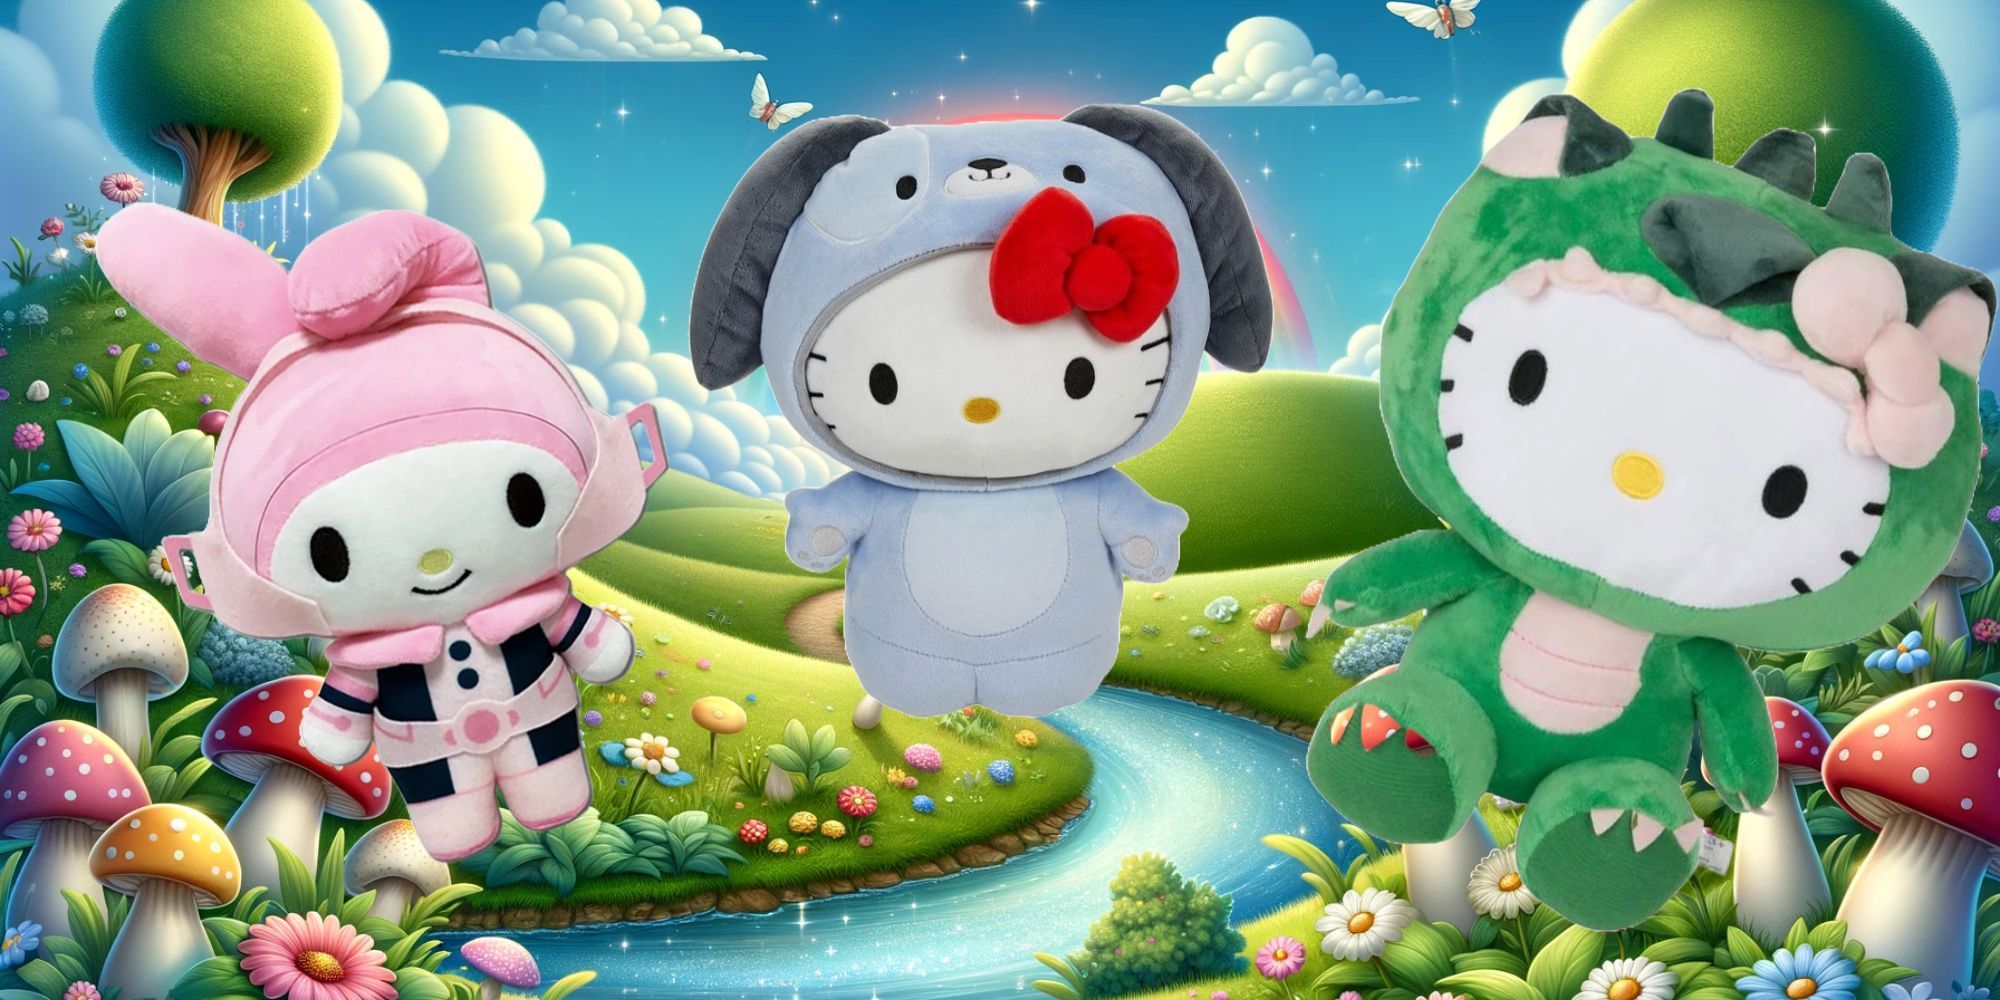 Cinnamoroll's Top 5 Episodes  Hello Kitty and Friends Supercute